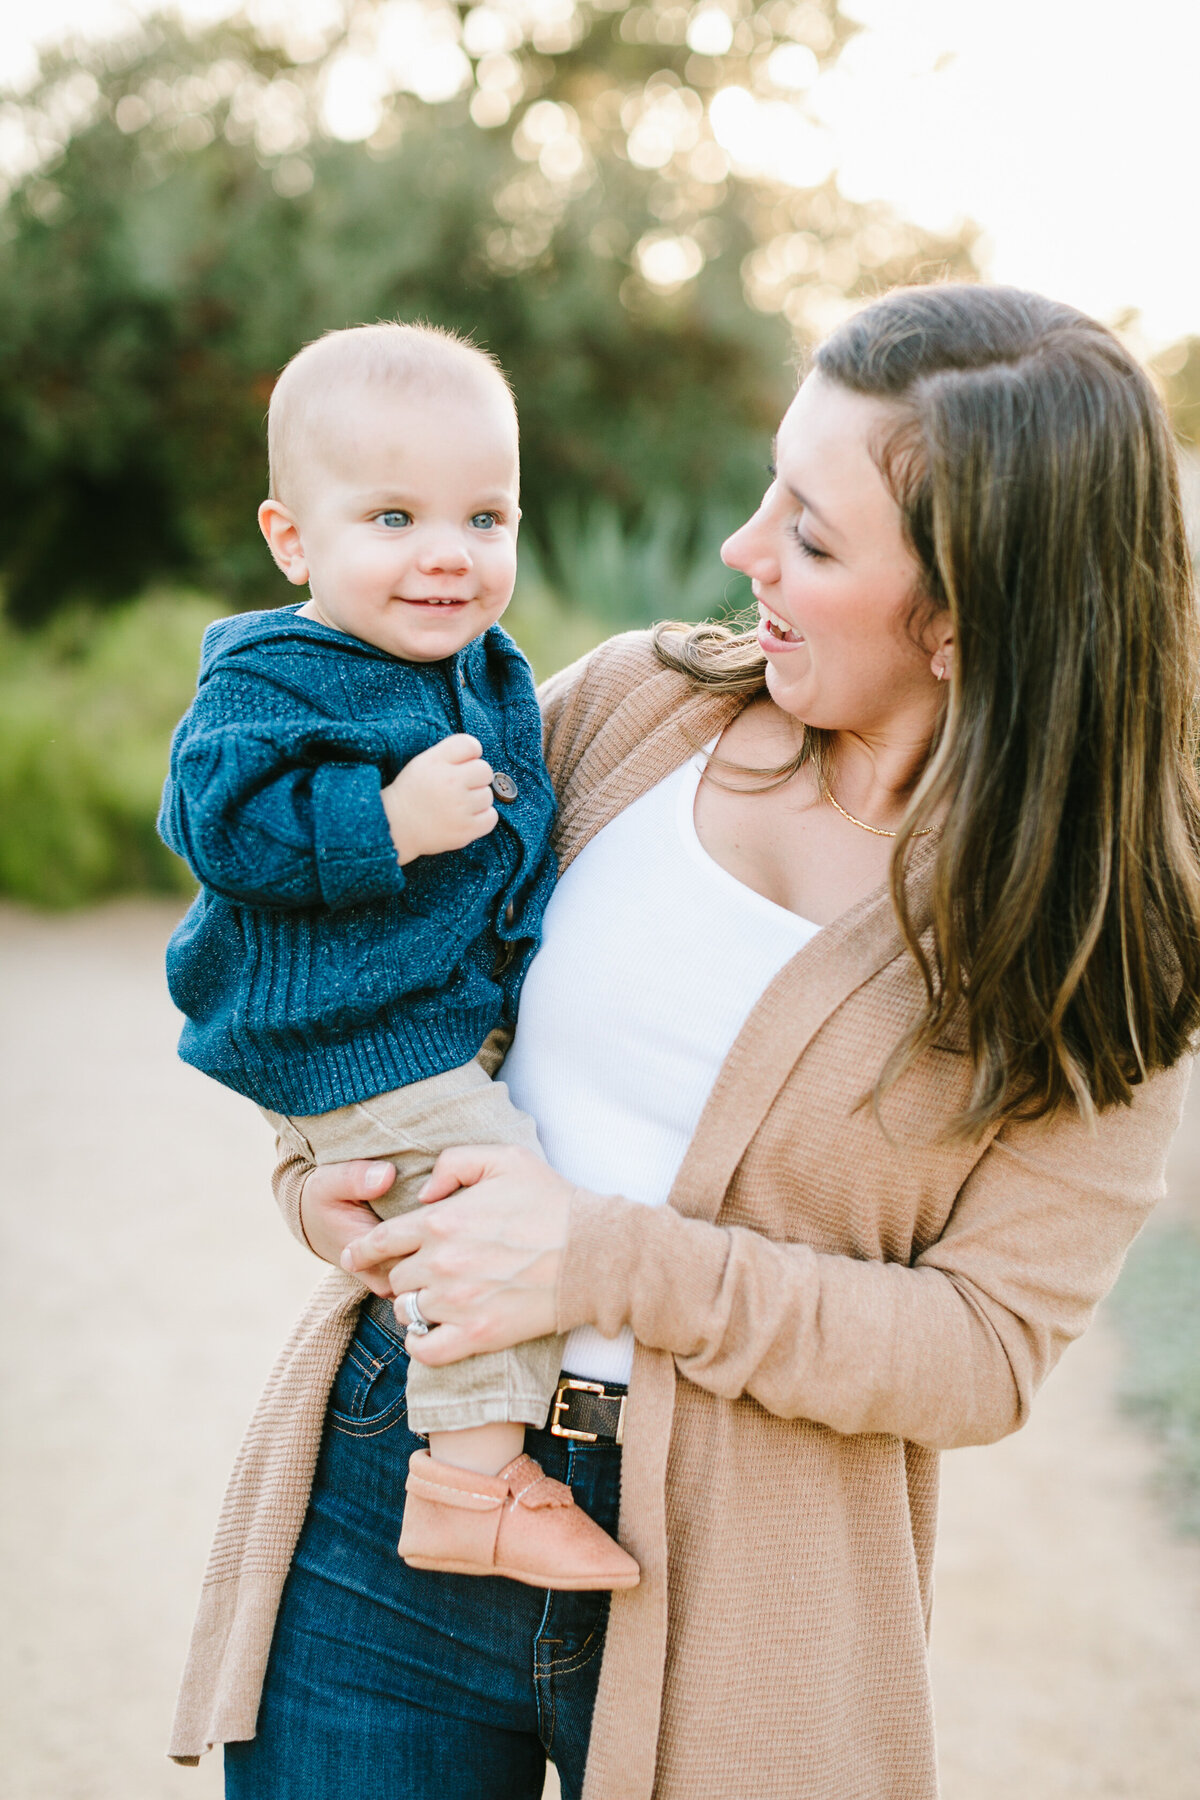 Best California and Texas Family Photographer-Jodee Debes Photography-258